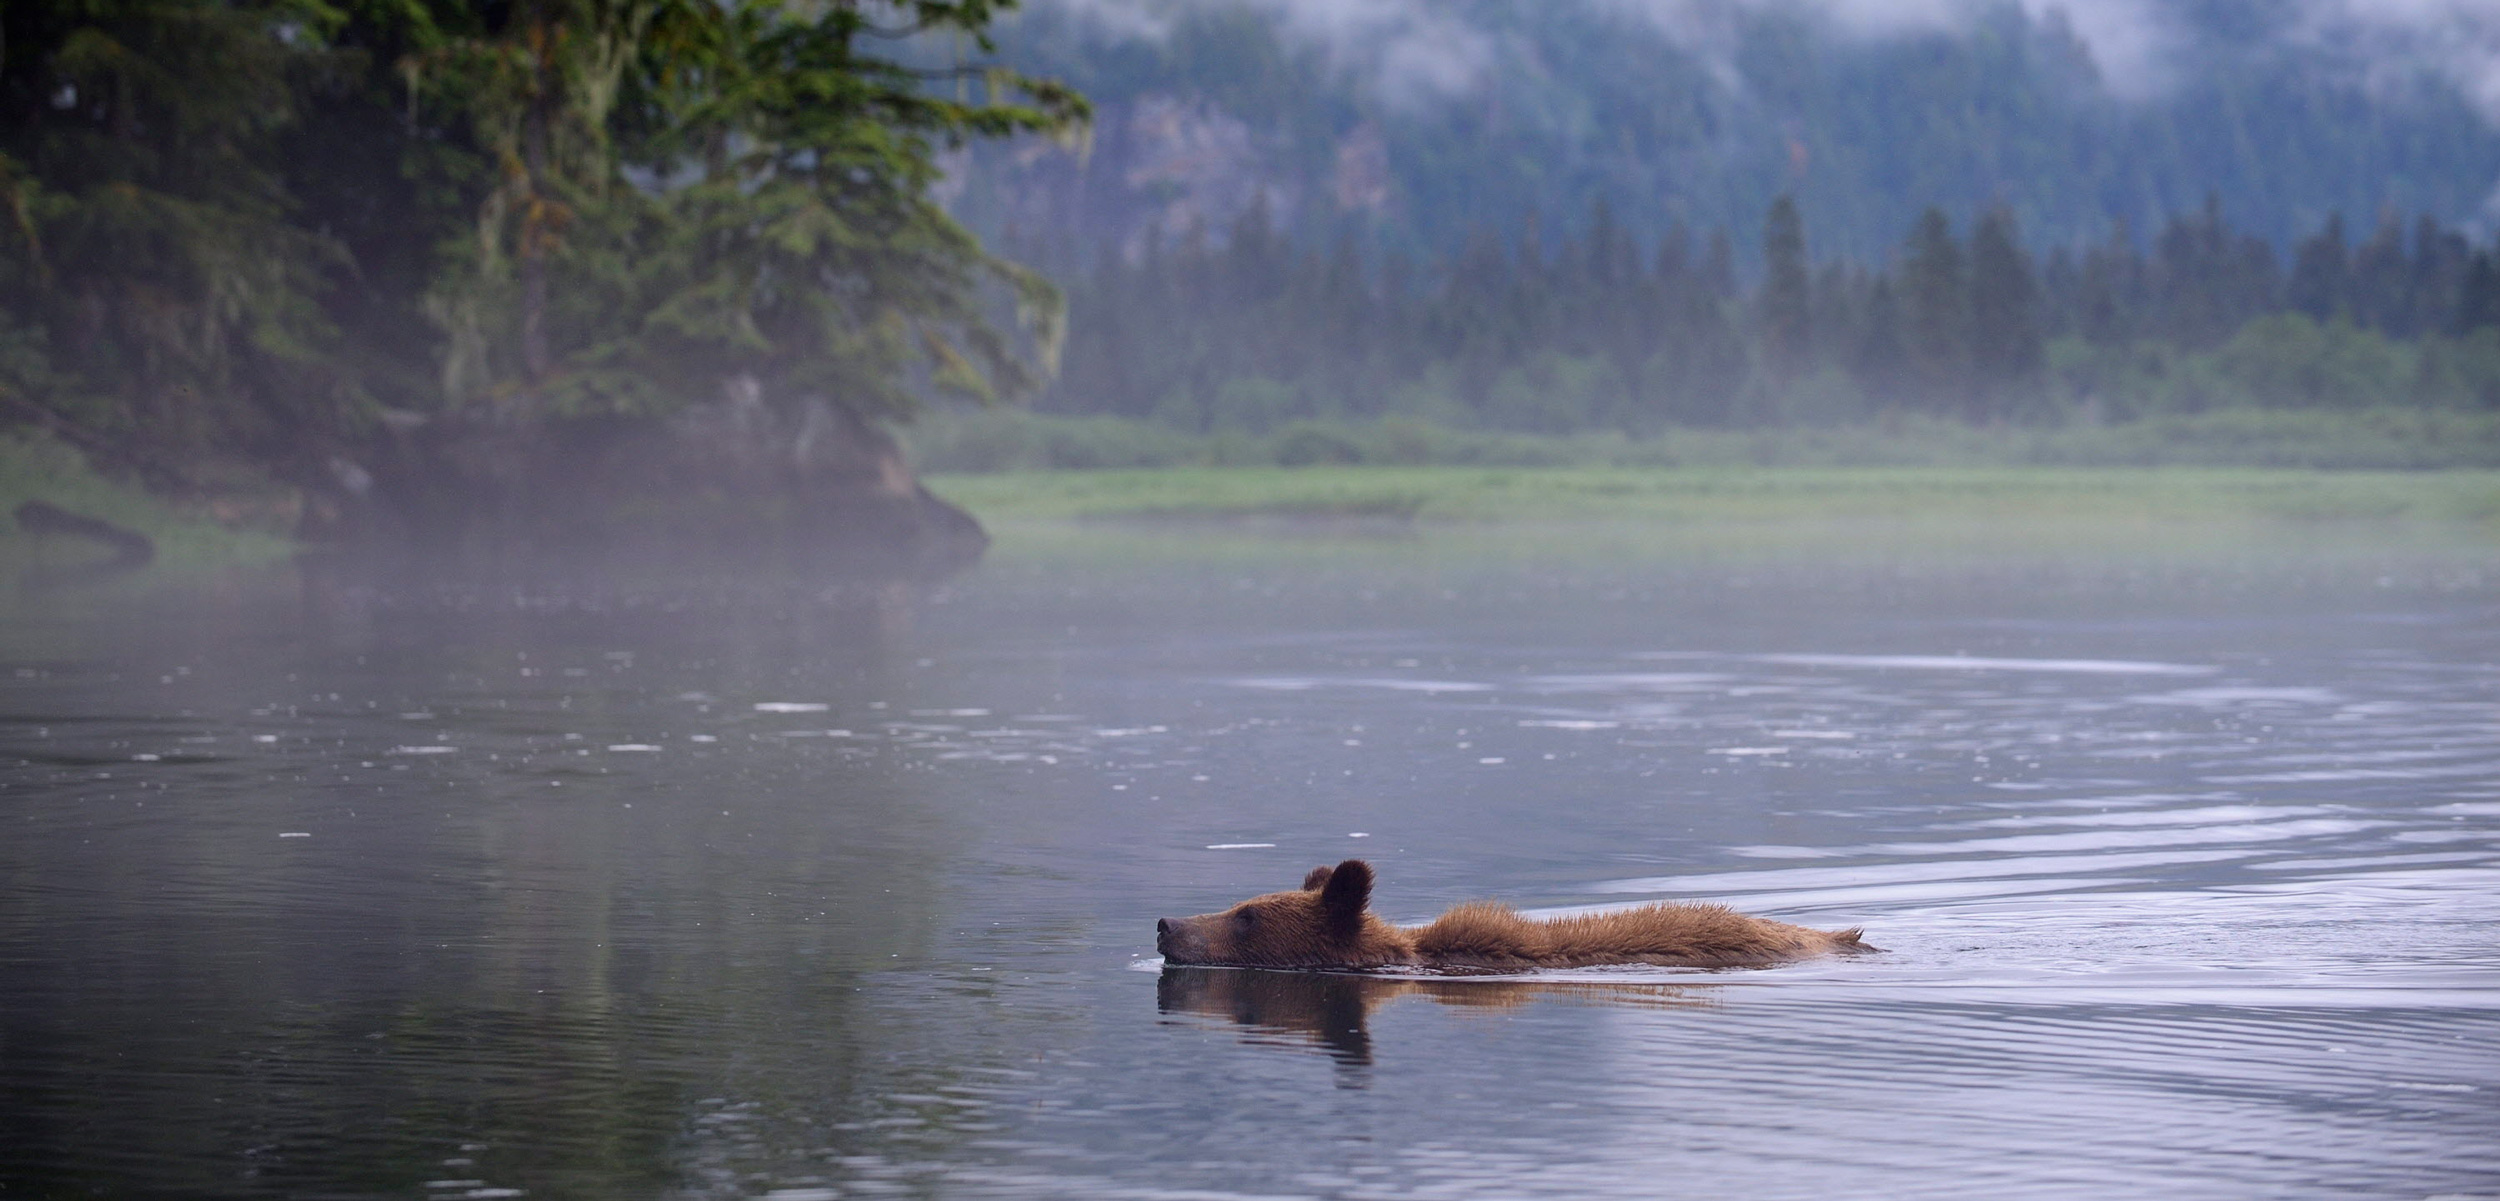 Juvenile Grizzly bear swimming